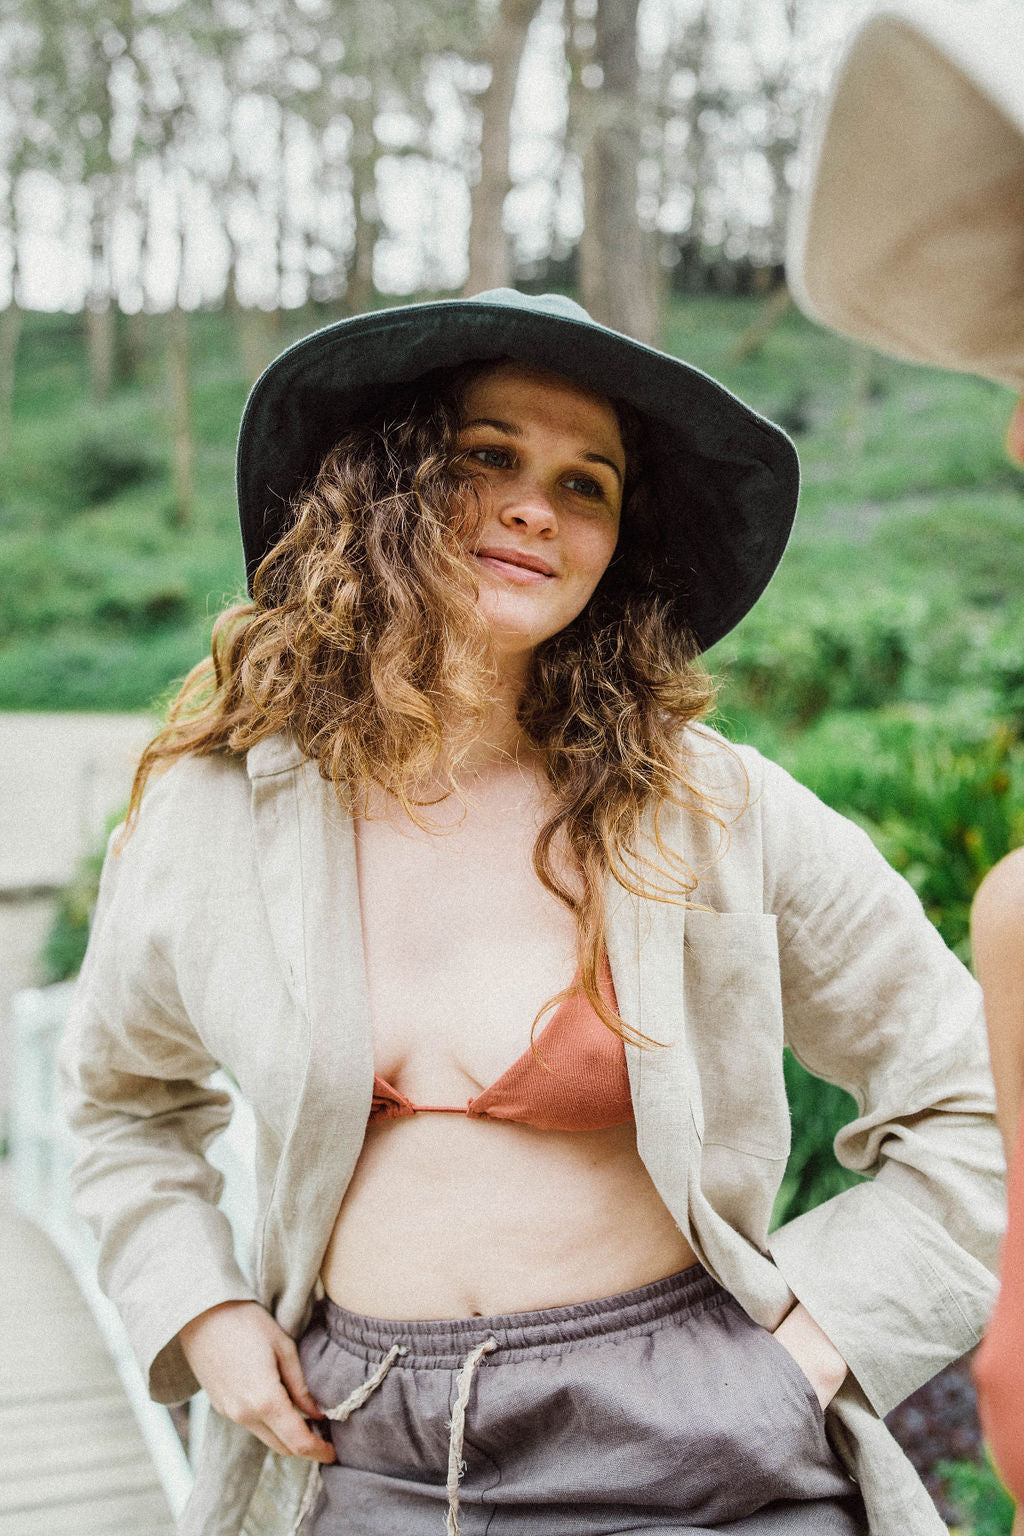 Solpardus collection at Trebah Gardens wearing Nyx linen hat Saba linen shirt Thea bamboo bikini top Atti linen trousers all natural and perfect for sensitive skin psoriasis and eczema